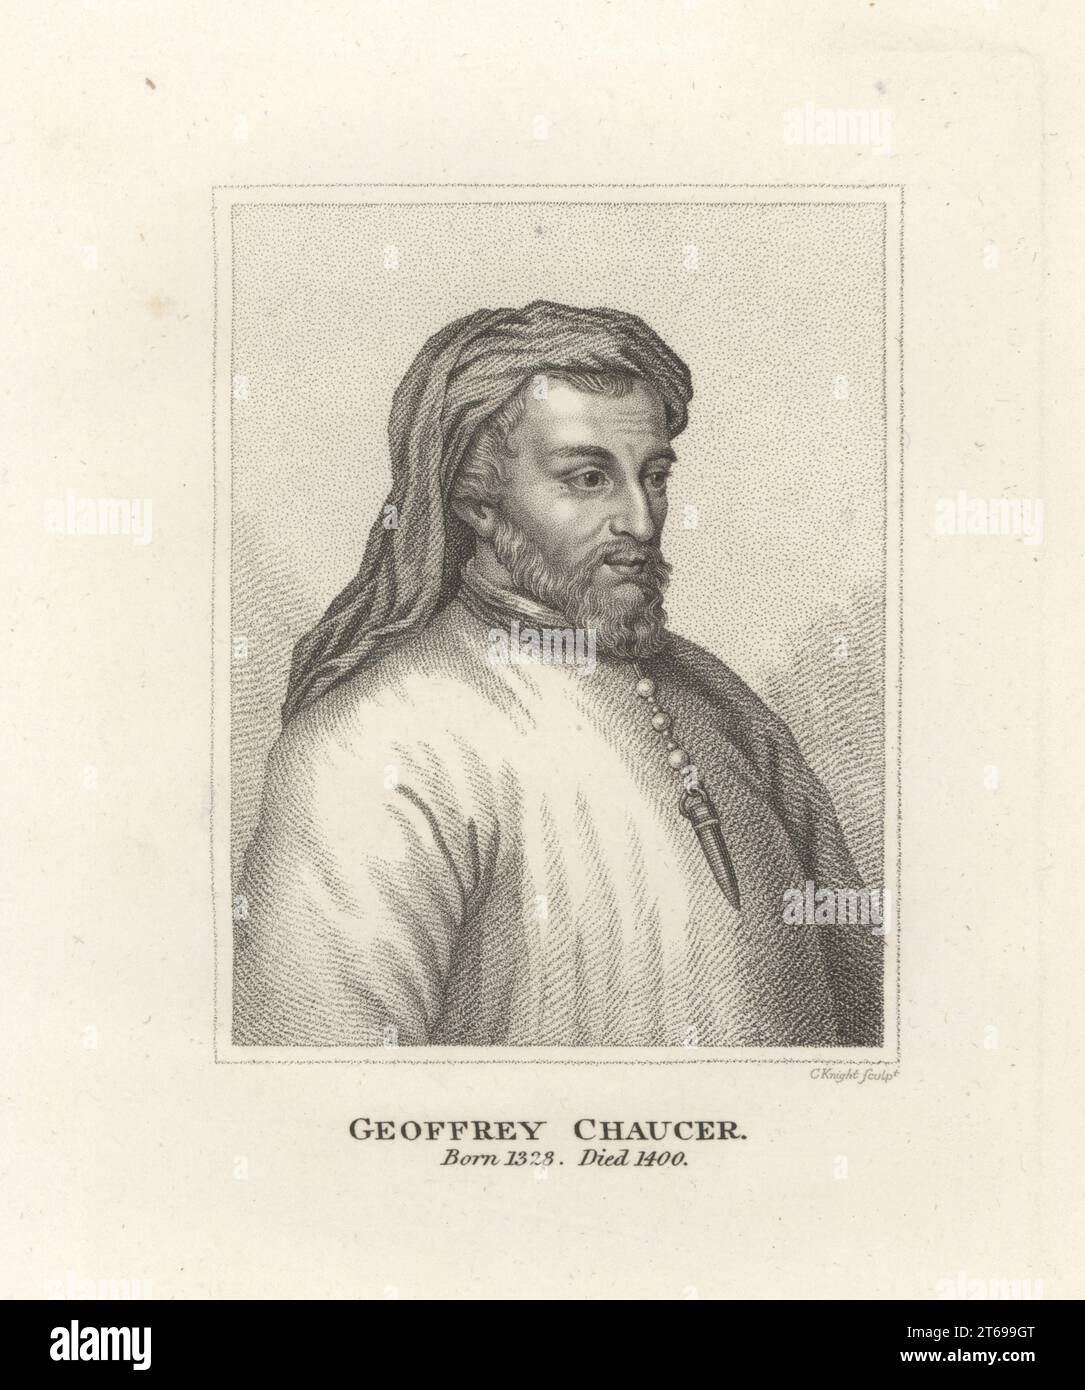 Geoffrey Chaucer, English author and poet, writer of The Canterbury Tales, first book publshed by printing press in England, 1328-1400. Copperplate engraving by Charles Knight from Samuel Woodburns Gallery of Rare Portraits Consisting of Original Plates, George Jones, 102 St Martins Lane, London, 1816. Stock Photo